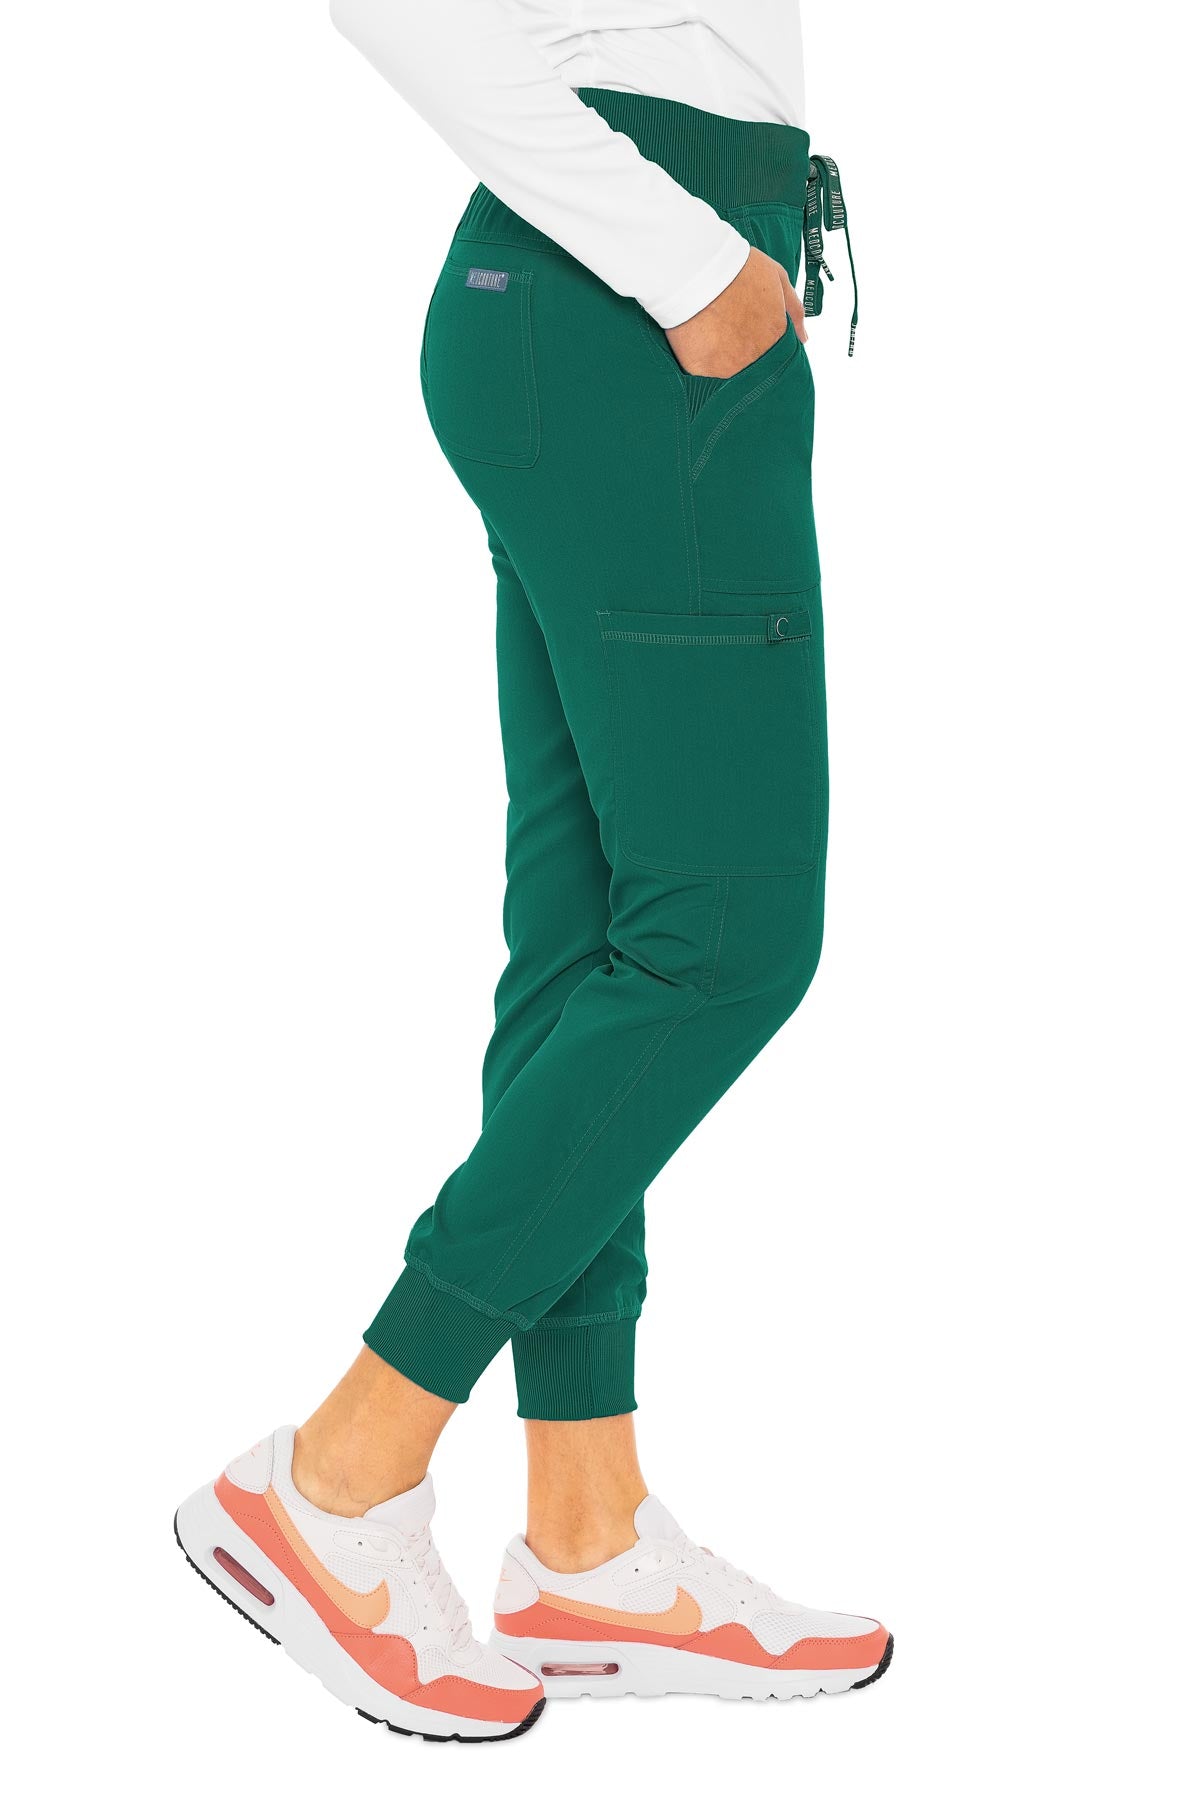 Med Couture Touch 7710 Women's Jogger Yoga Pant Hunter Side